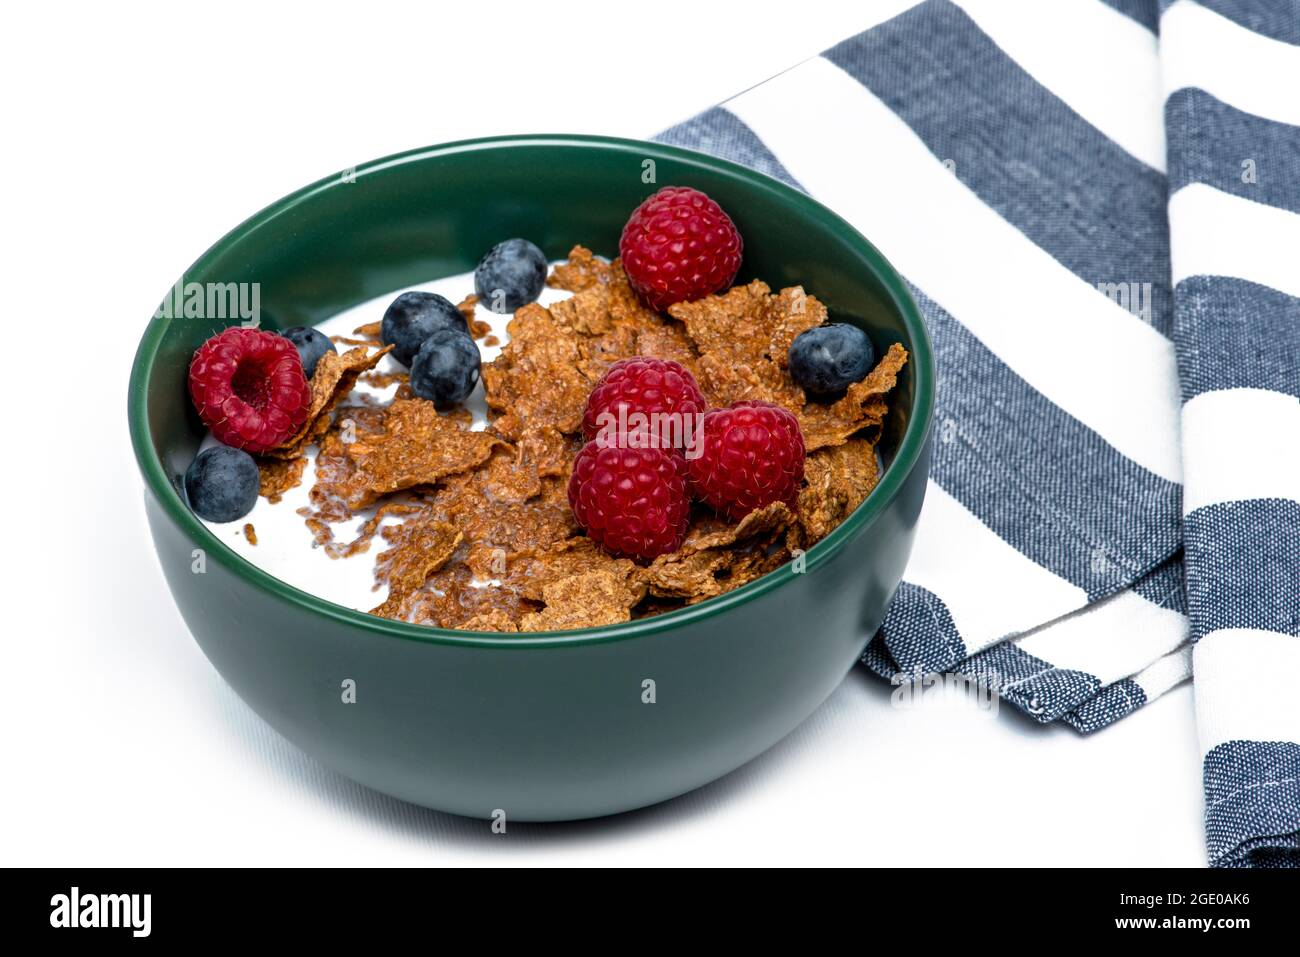 Muesli, isolate on white. Breakfast, healthy food and diet. Muesli with fruits and milk in a plate. Blueberries, strawberries and raspberries on a Stock Photo